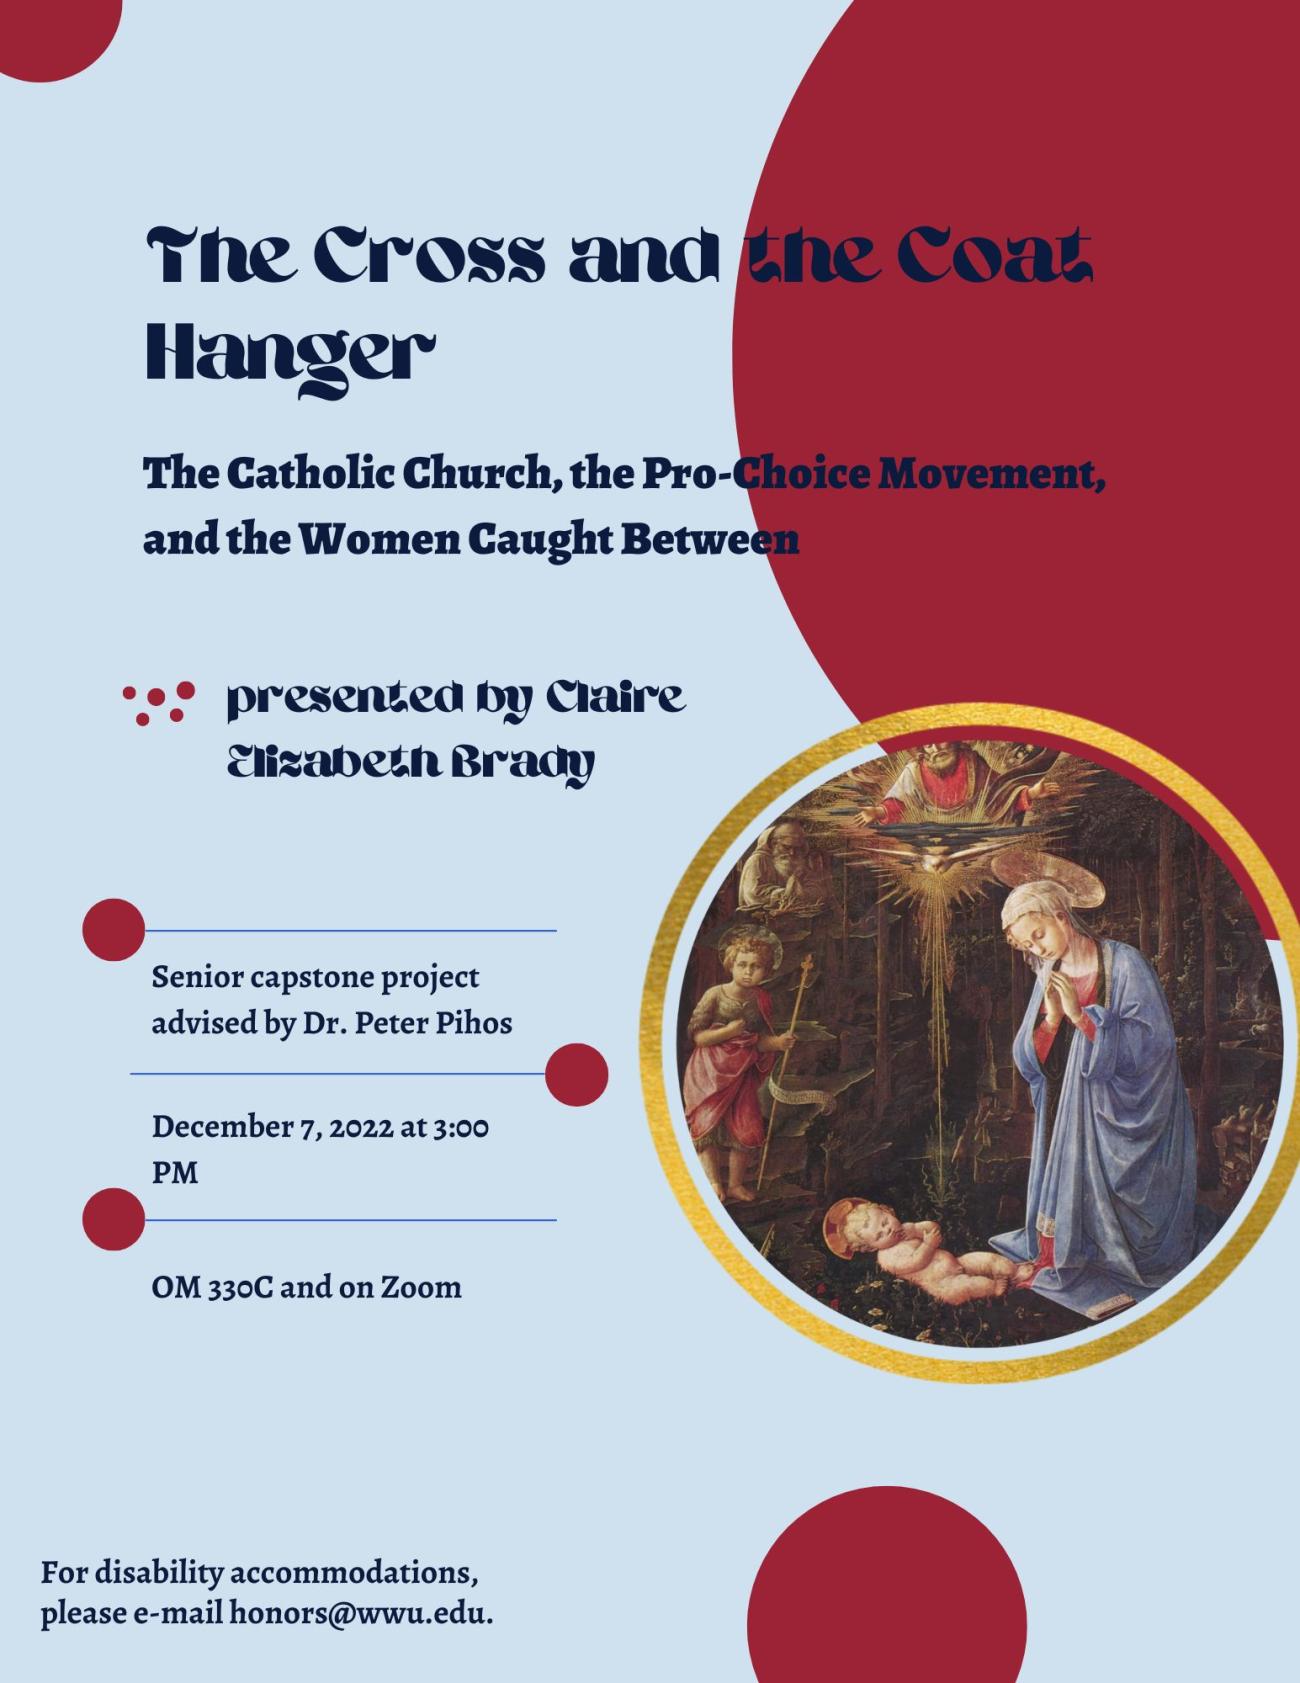 A blue poster with maroon circles and one separate circle that contains a painting of baby Jesus and Mary. The text reads: "The Cross and the Coat Hanger: The Catholic Church, the Pro-Choice Movement, and the Women Caught Between. Presented by Claire Elizabeth Brady. Senior capstone project advised by Dr. Peter Pihos. December 7, 2022 at 3:00 PM. OM 330C and on Zoom. For disability accommodations, please e-mail honors@wwu.edu."